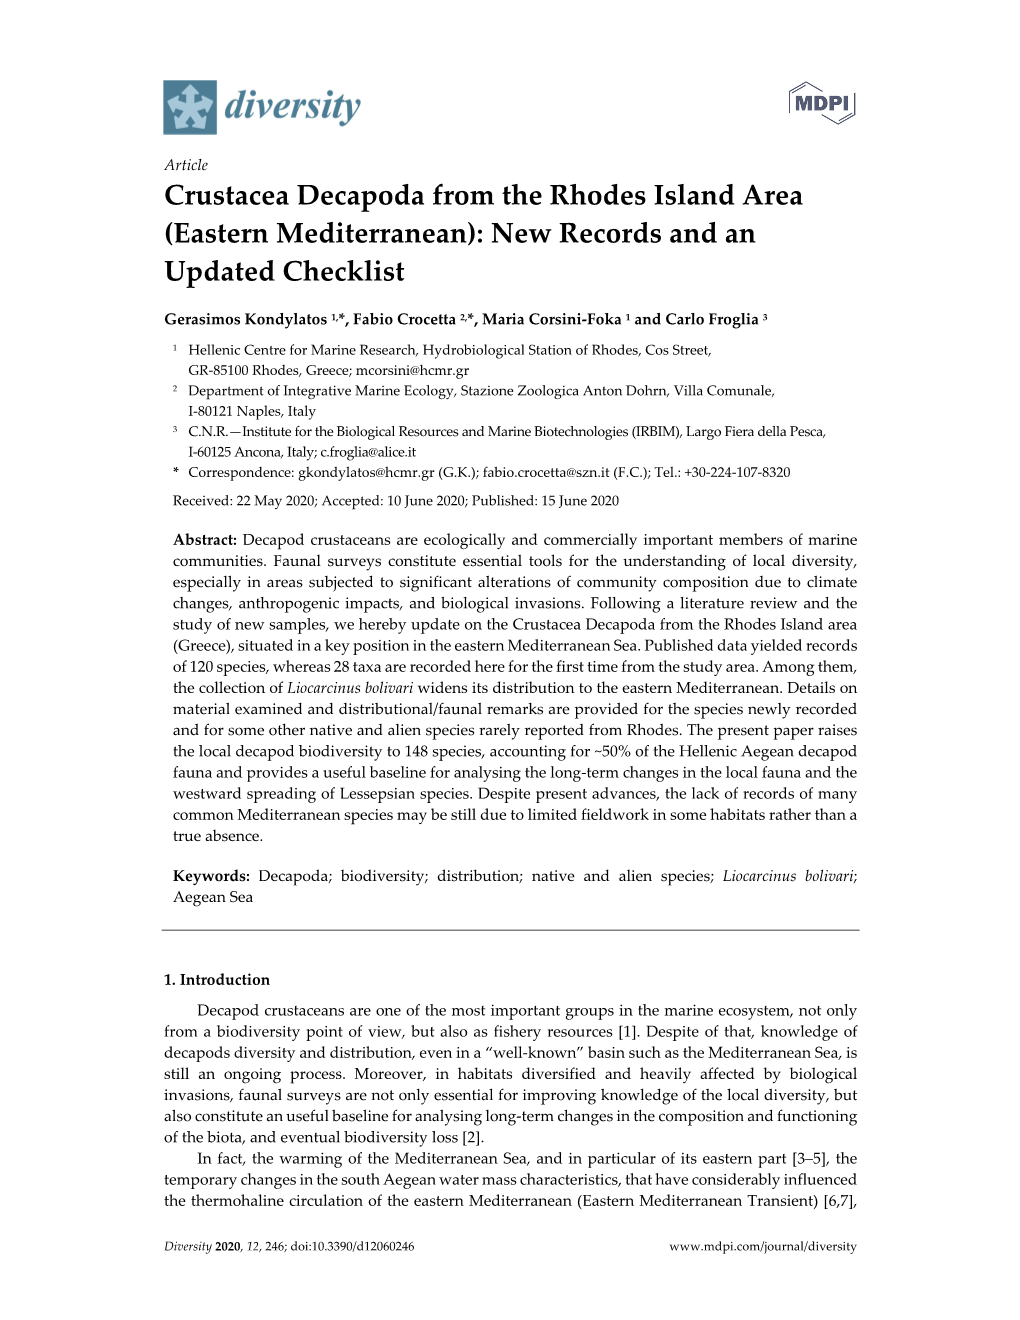 Crustacea Decapoda from the Rhodes Island Area (Eastern Mediterranean): New Records and an Updated Checklist